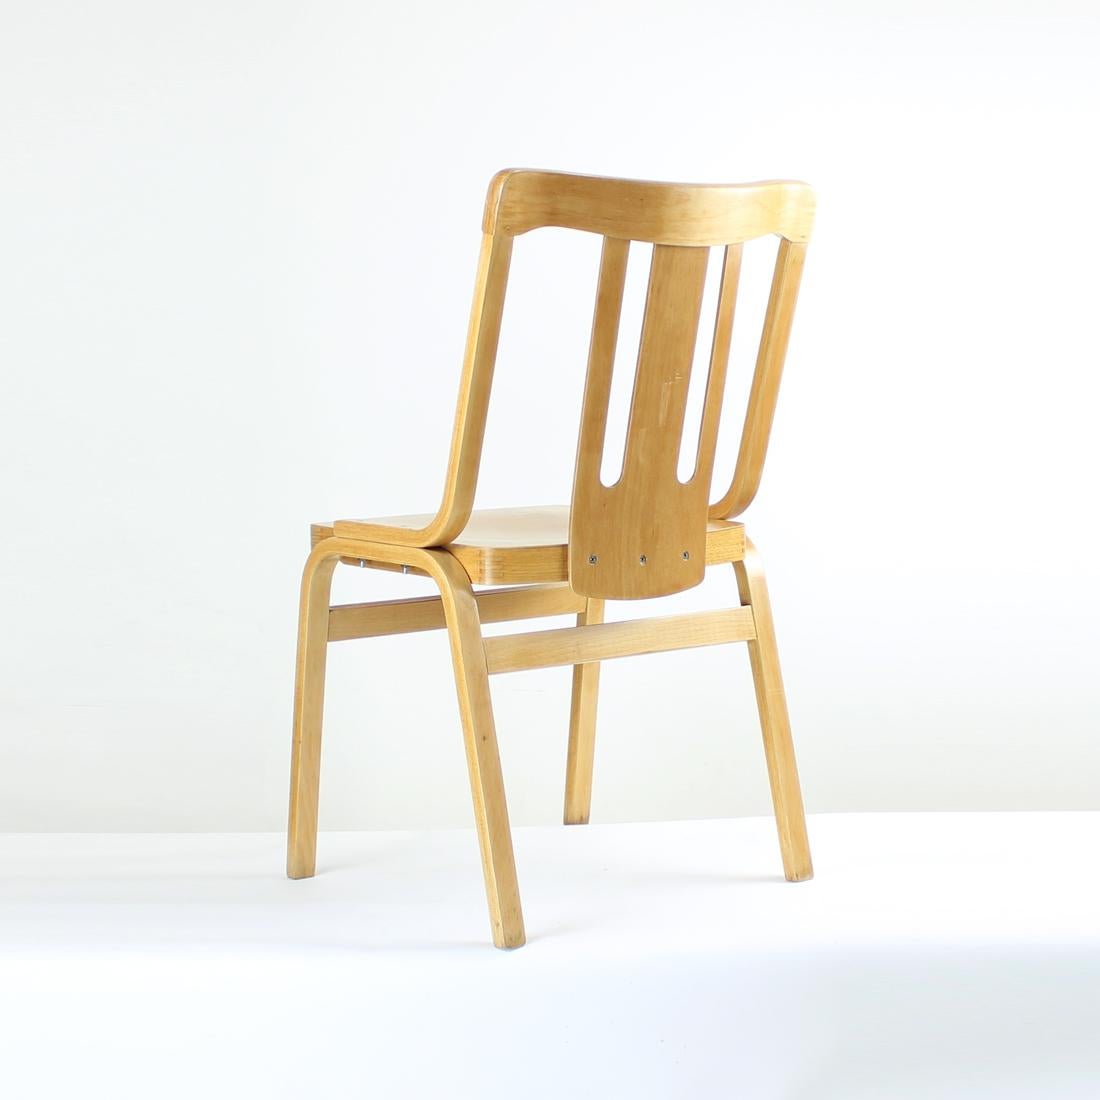 Mid-20th Century Midcentury Wooden Dining Chair by Ton, Czechoslovakia 1960s For Sale